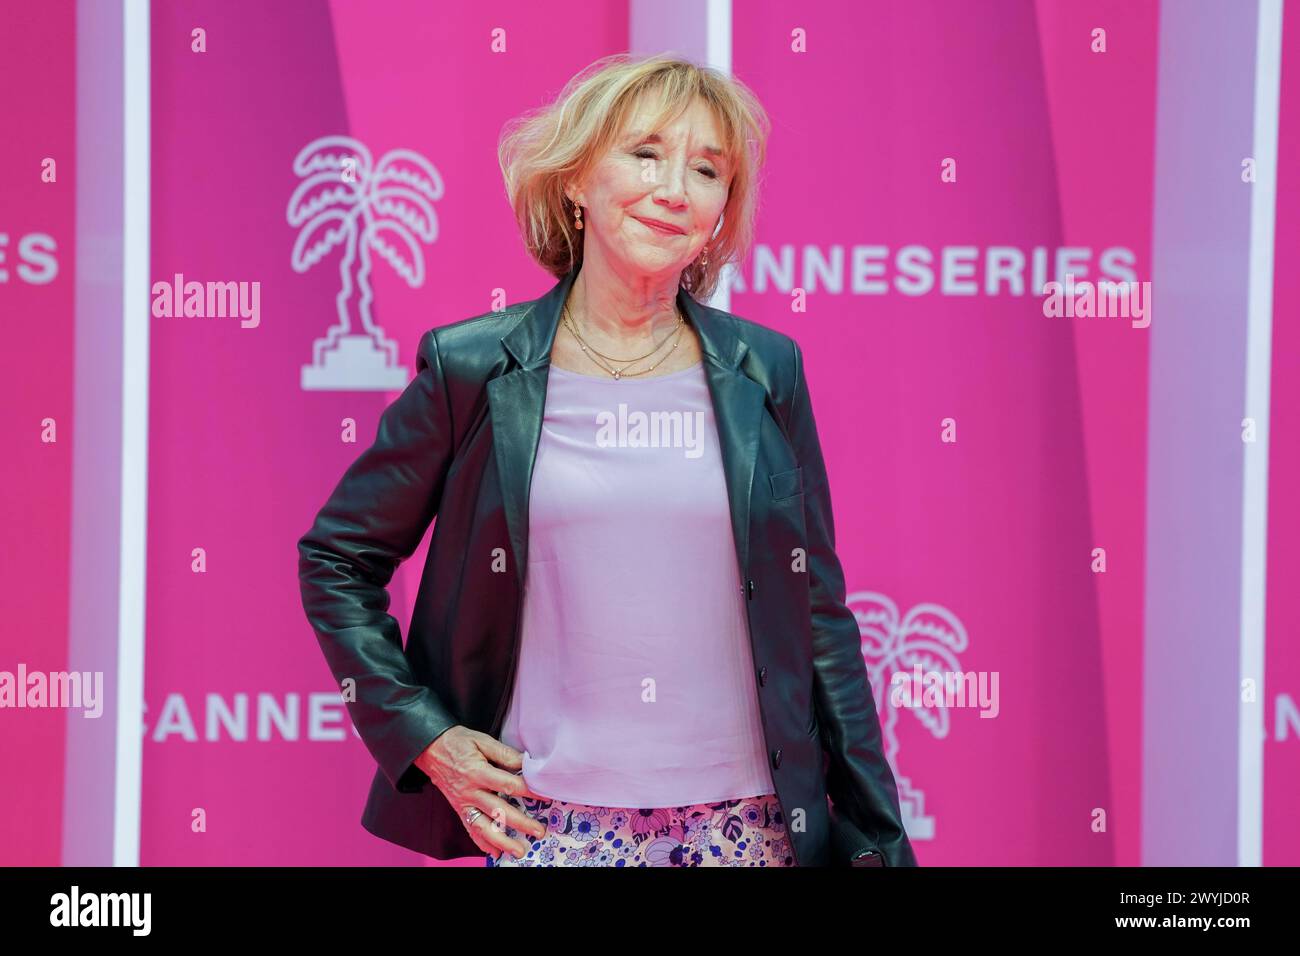 Cannes, France. 06th Apr, 2024. CANNES, FRANCE - APRIL 06: Marie-Anne Chazel attends the Pink Carpet during the 7th Canneseries International Festival on April 05, 2024 in Cannes, France attends the Pink Carpet during the 7th Canneseries International Festival on April 05, 2024 in Cannes, France` Stock Photo